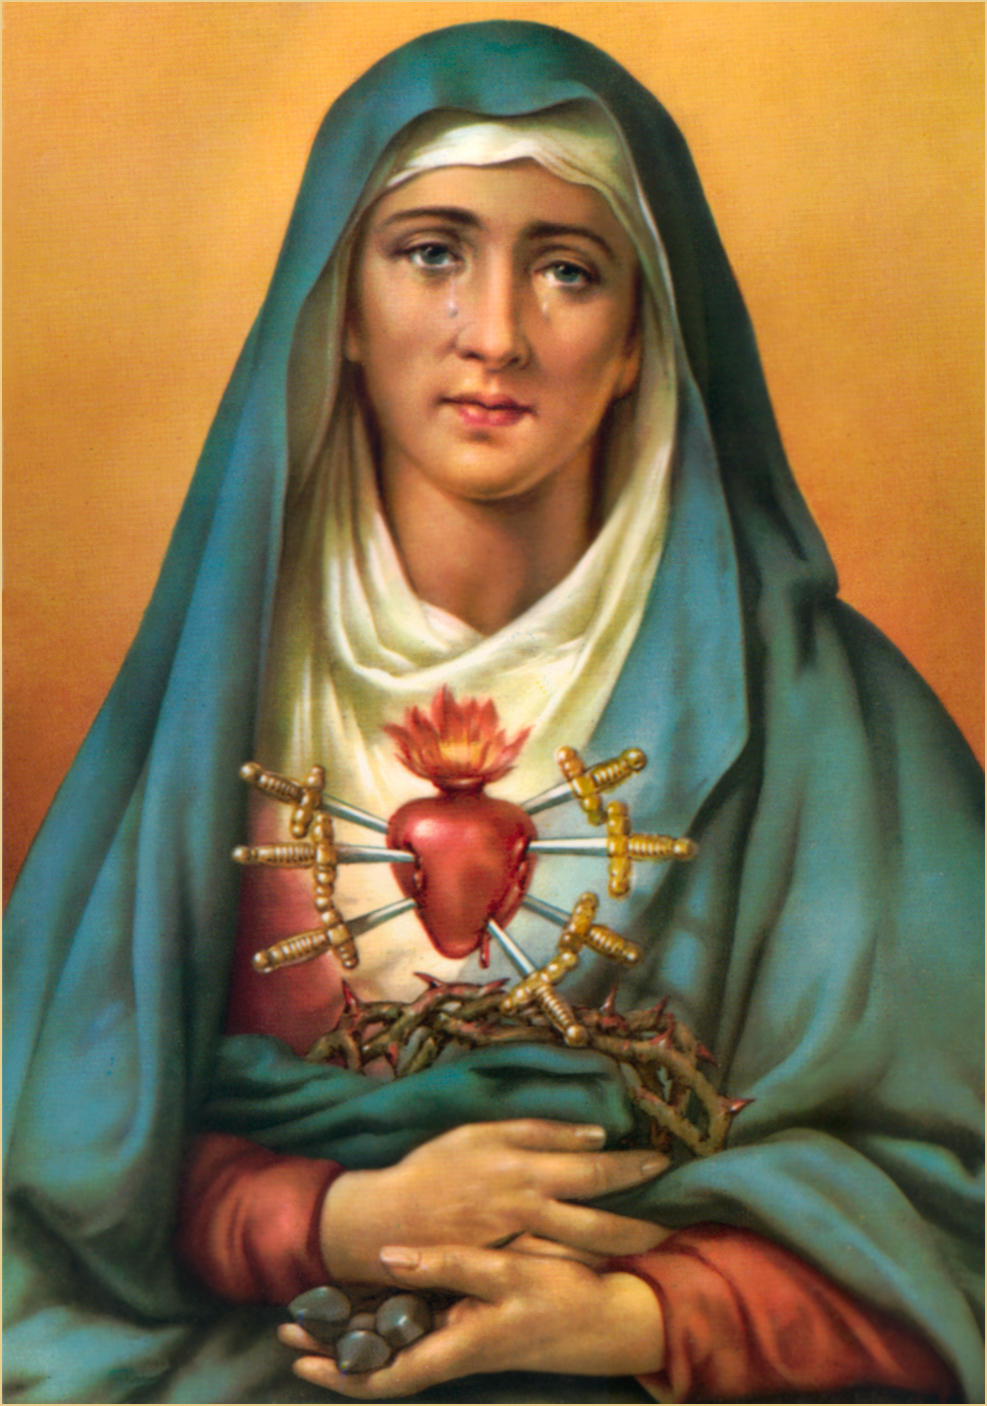 a-catholic-life-september-month-dedicated-to-our-lady-of-sorrows